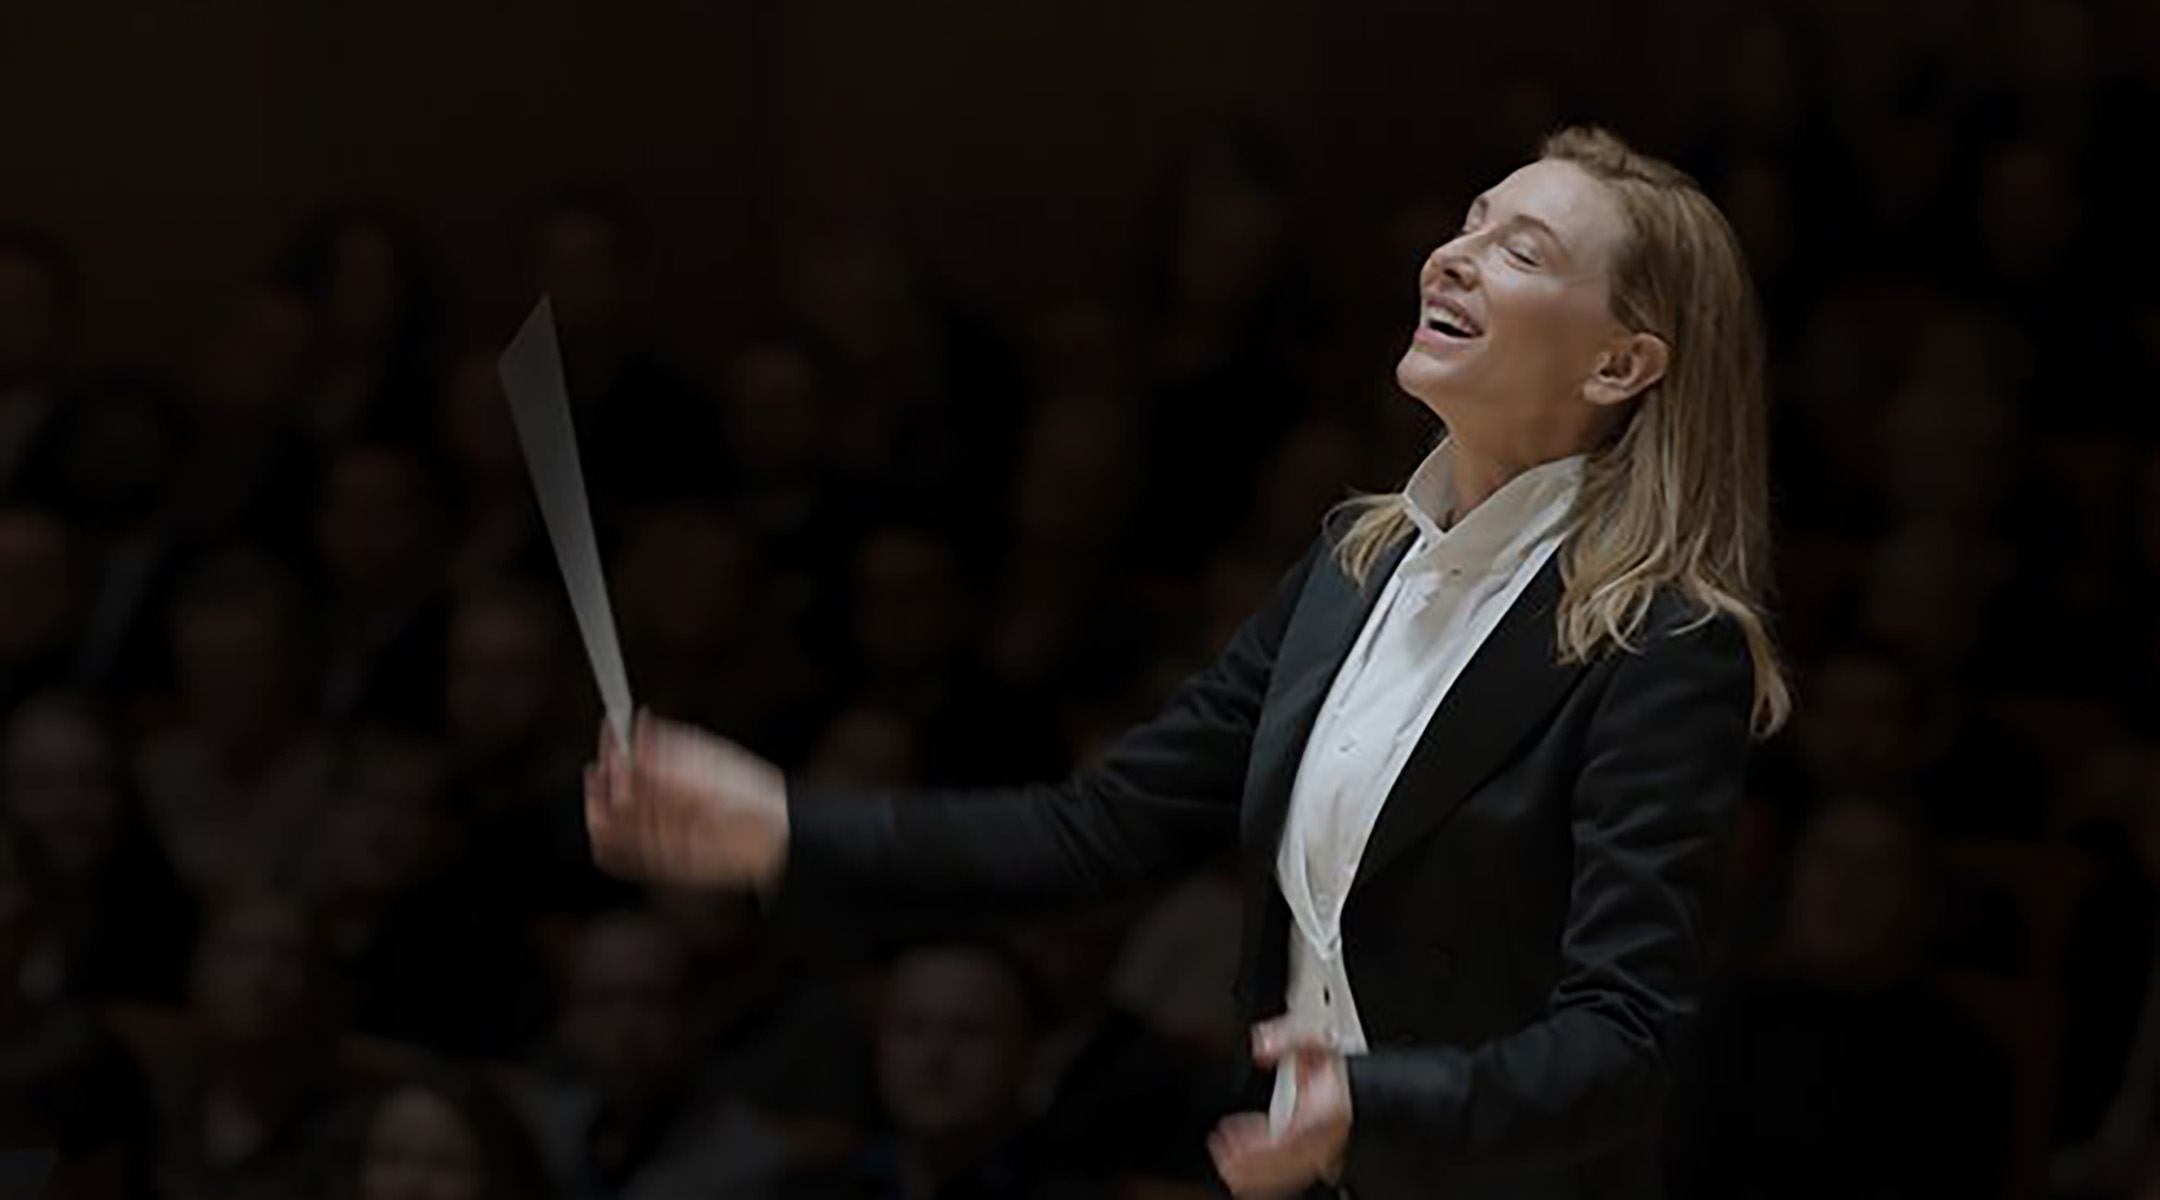 Cate Blanchett plays a conductor role in the new film. (© 2022 Universal Pictures)